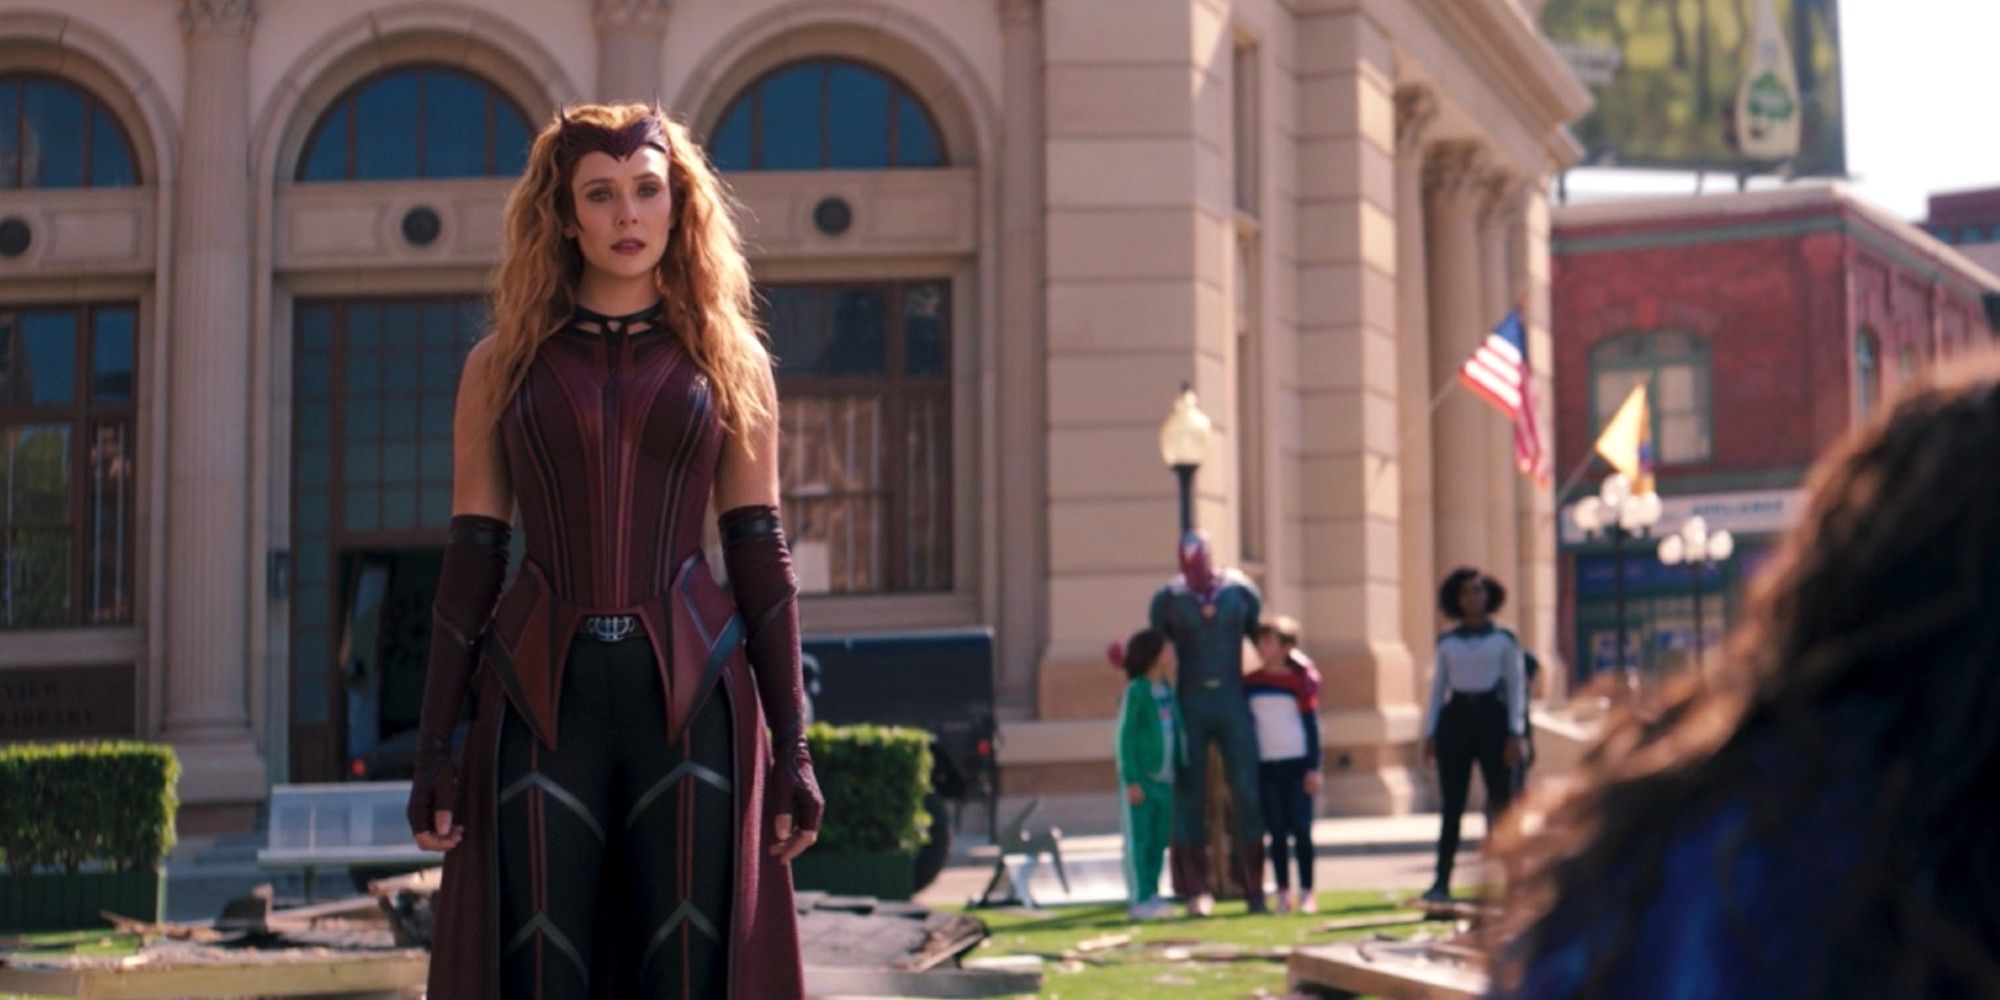 Wanda in her Scarlet Witch costume standing in Westview in WandaVision